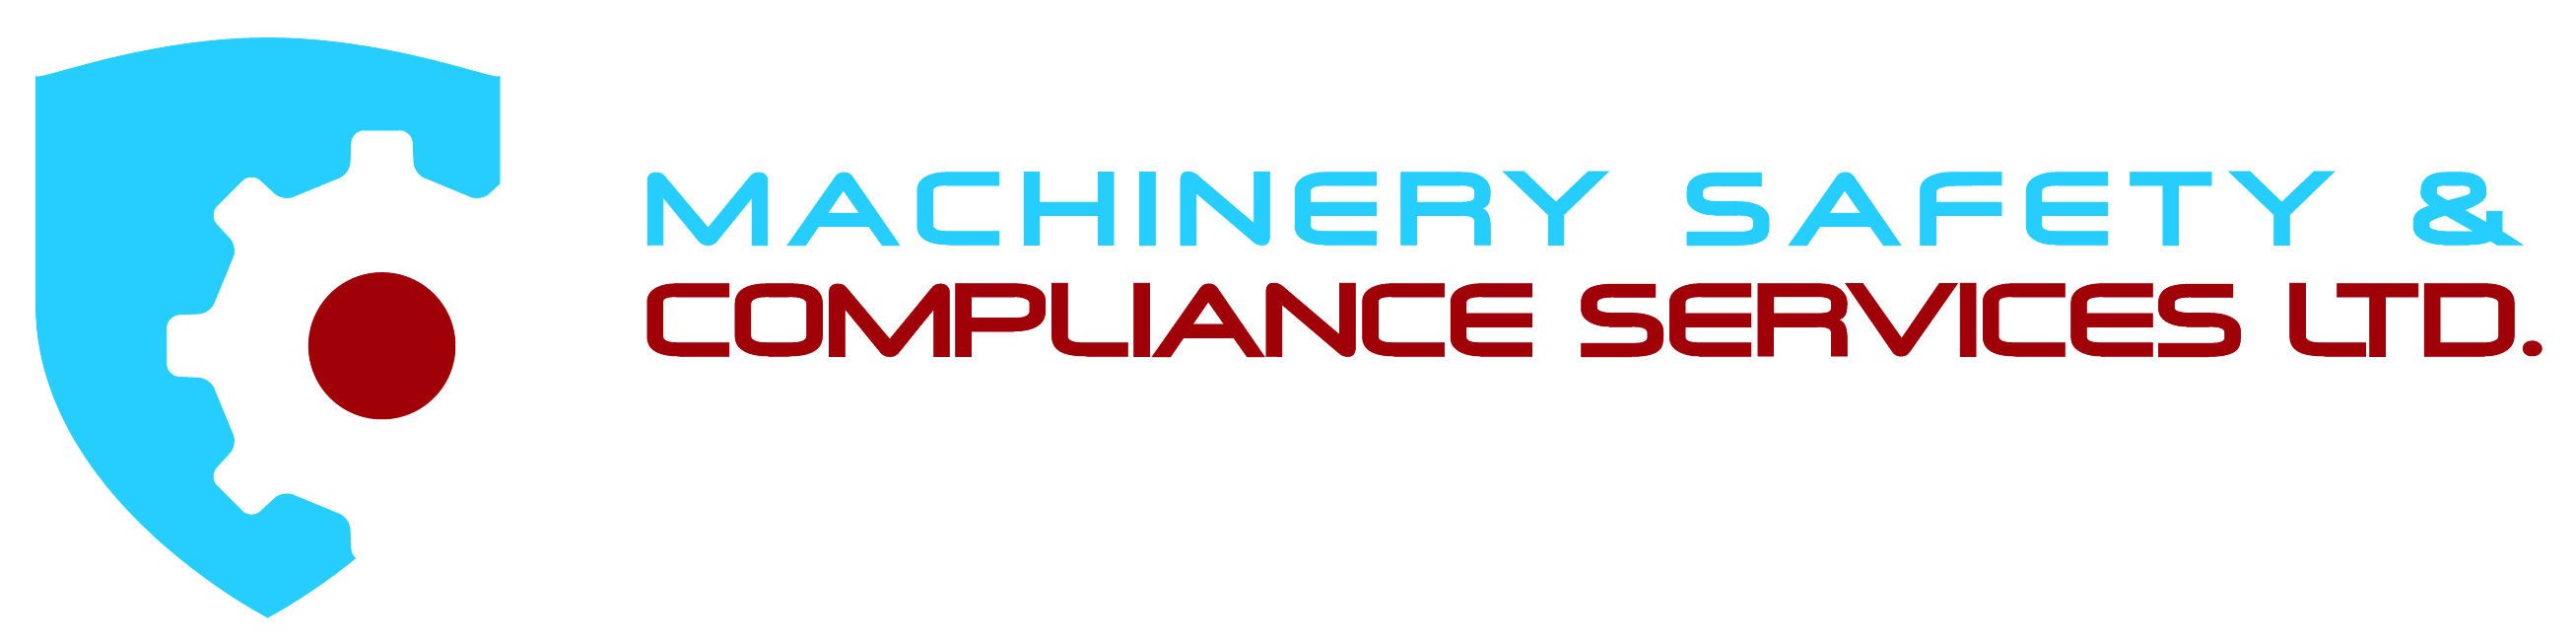 Machinery Safety Compliance Services